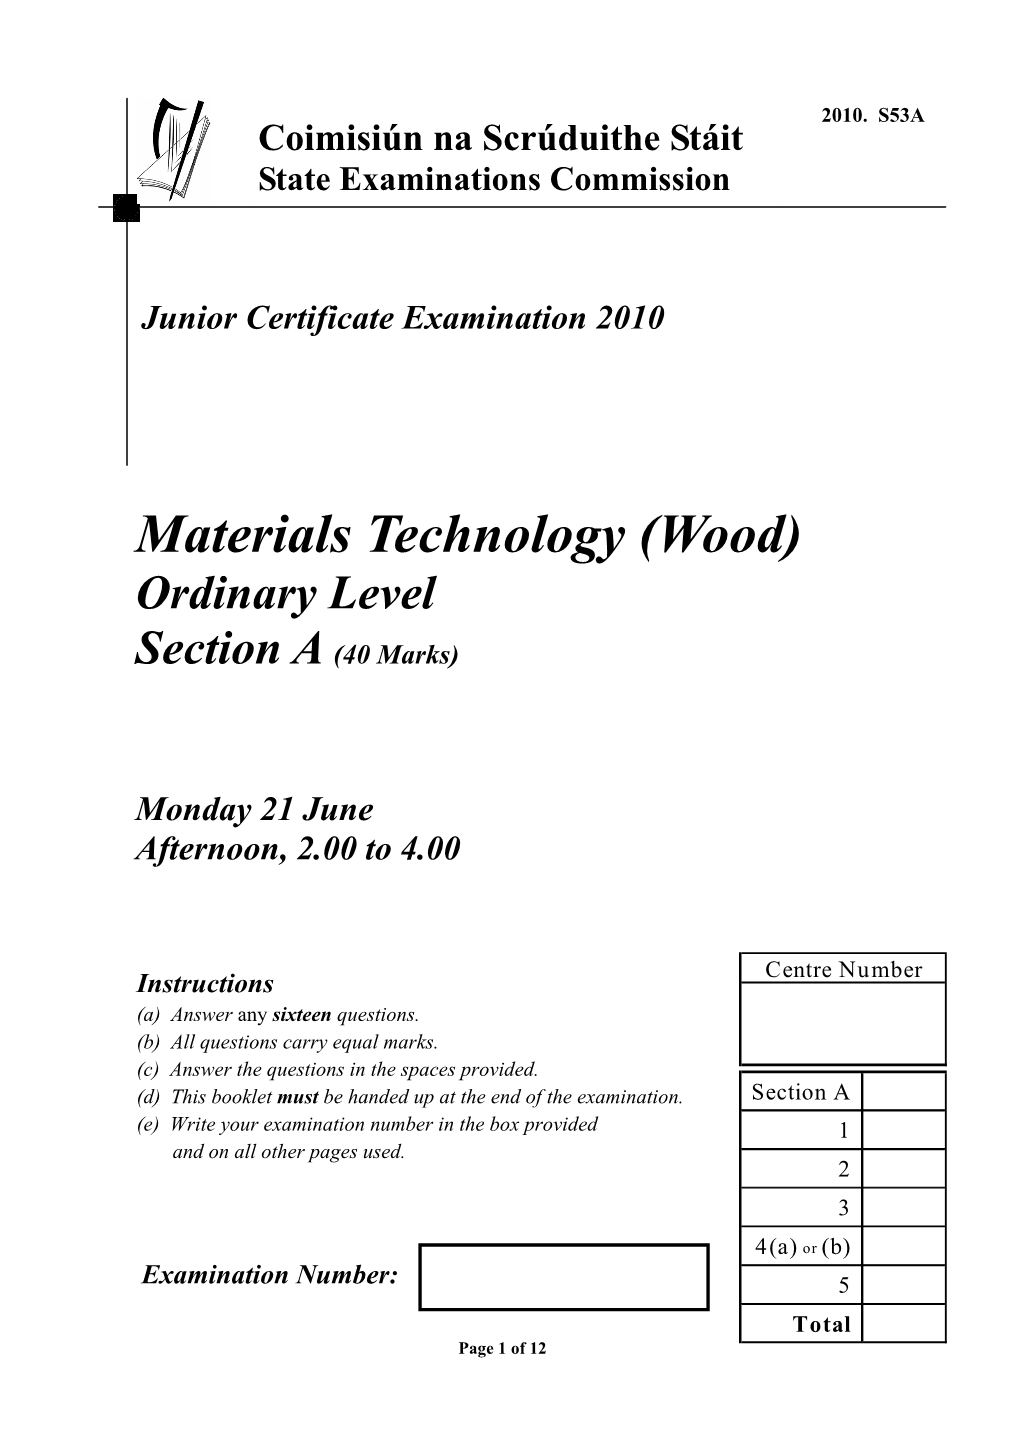 Materials Technology (Wood) Ordinary Level Section a (40 Marks)